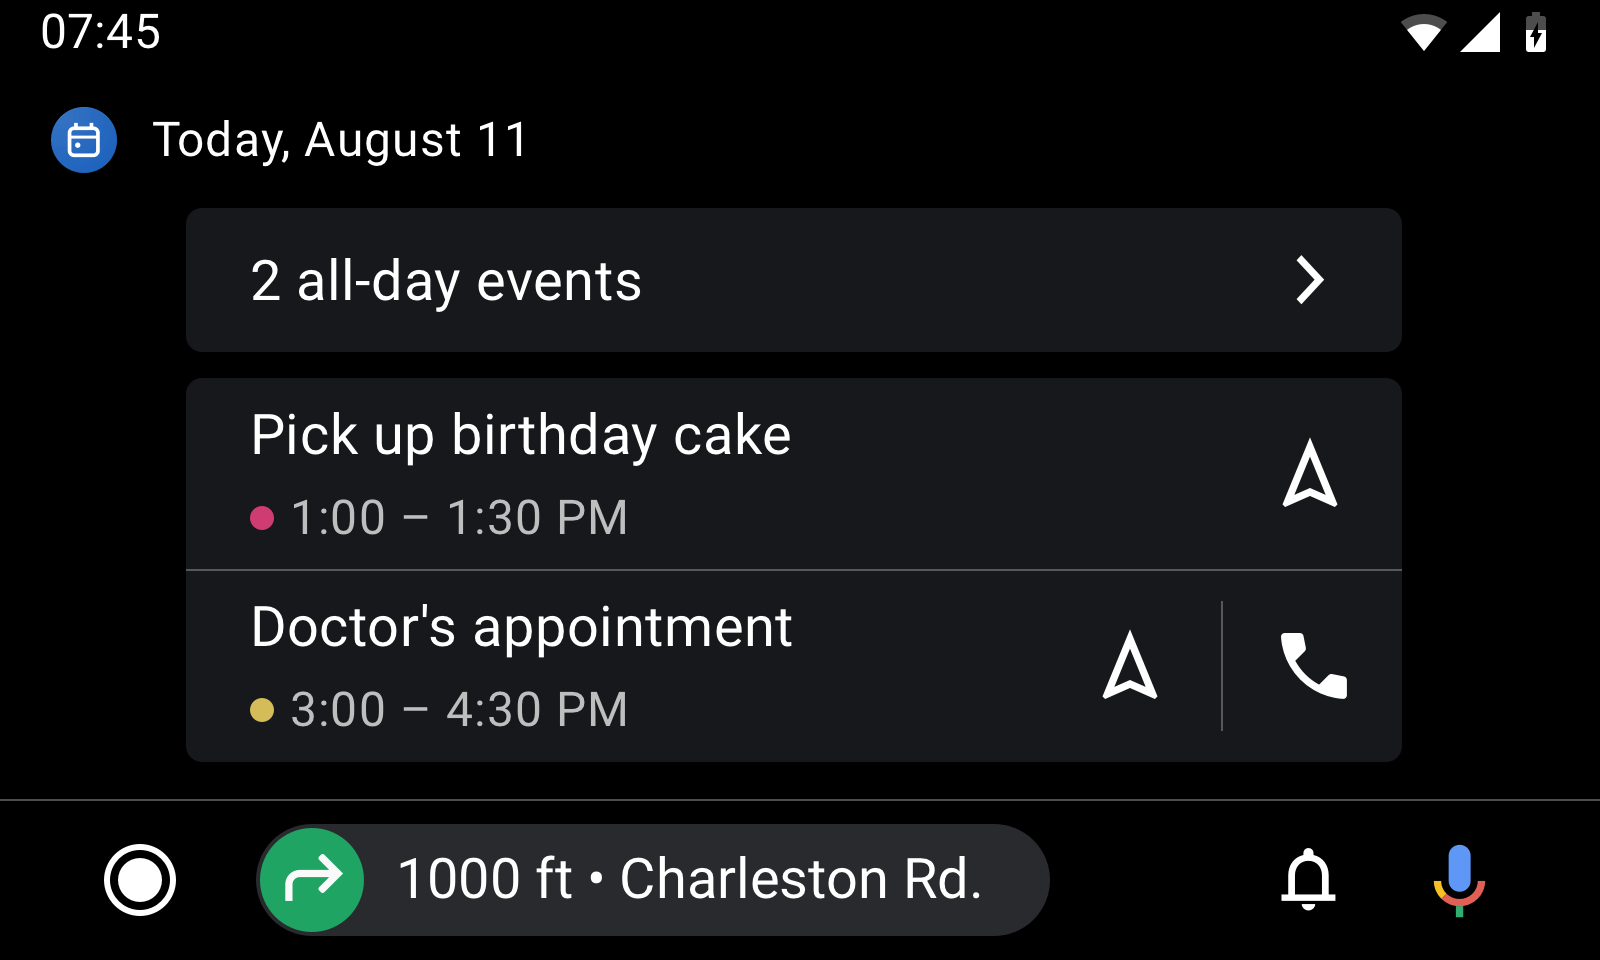 Android Auto rolling out Calendar and incar Settings app